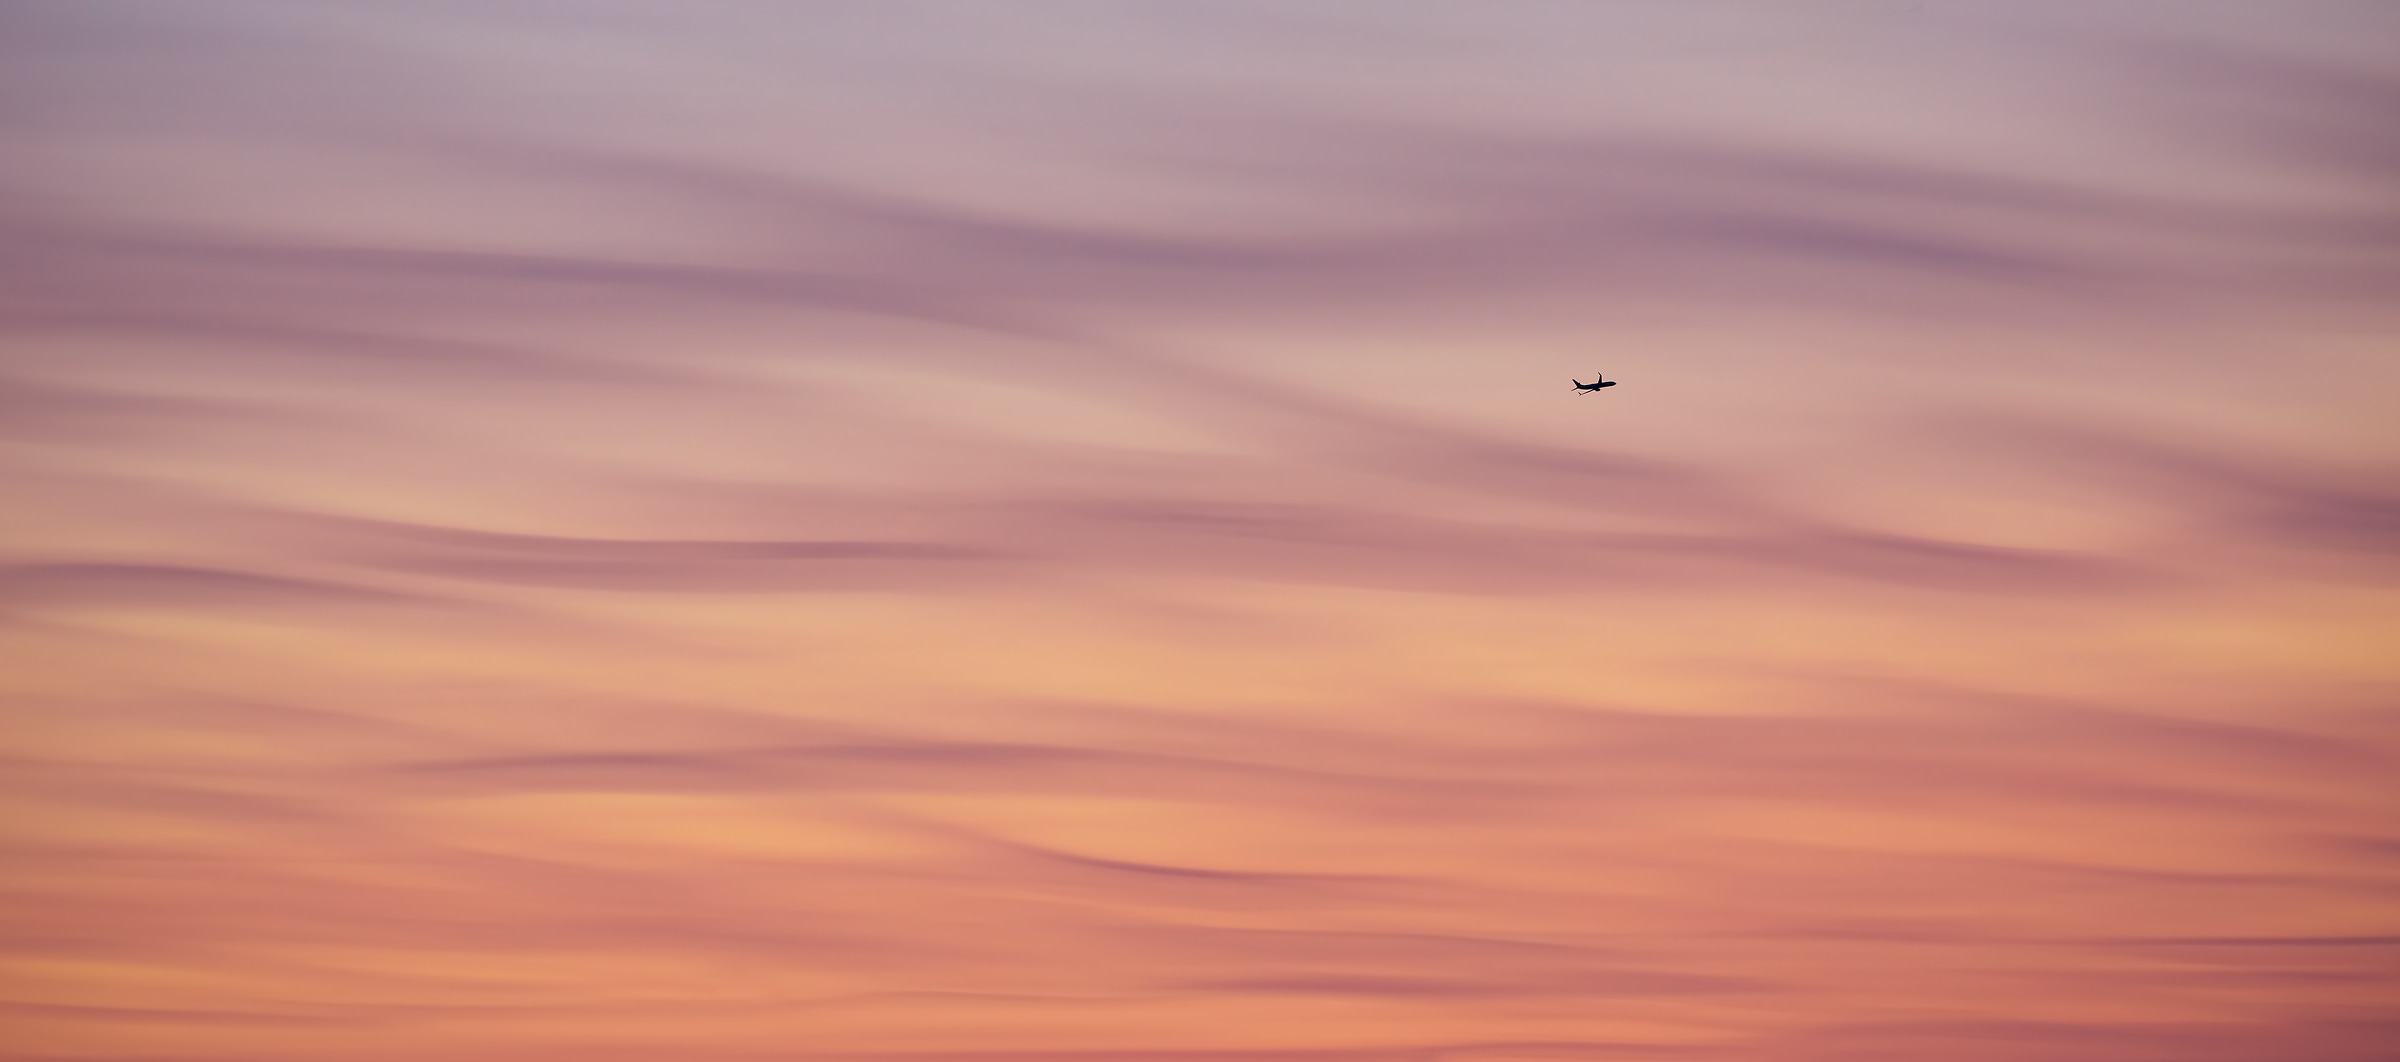 426 megapixels! A very high resolution, large-format VAST photo print of a beautiful sky with wavy, peaceful, and soothing clouds at sunset while an airplane takes off in the distance; artistic photograph created by Dan Piech in New York City.